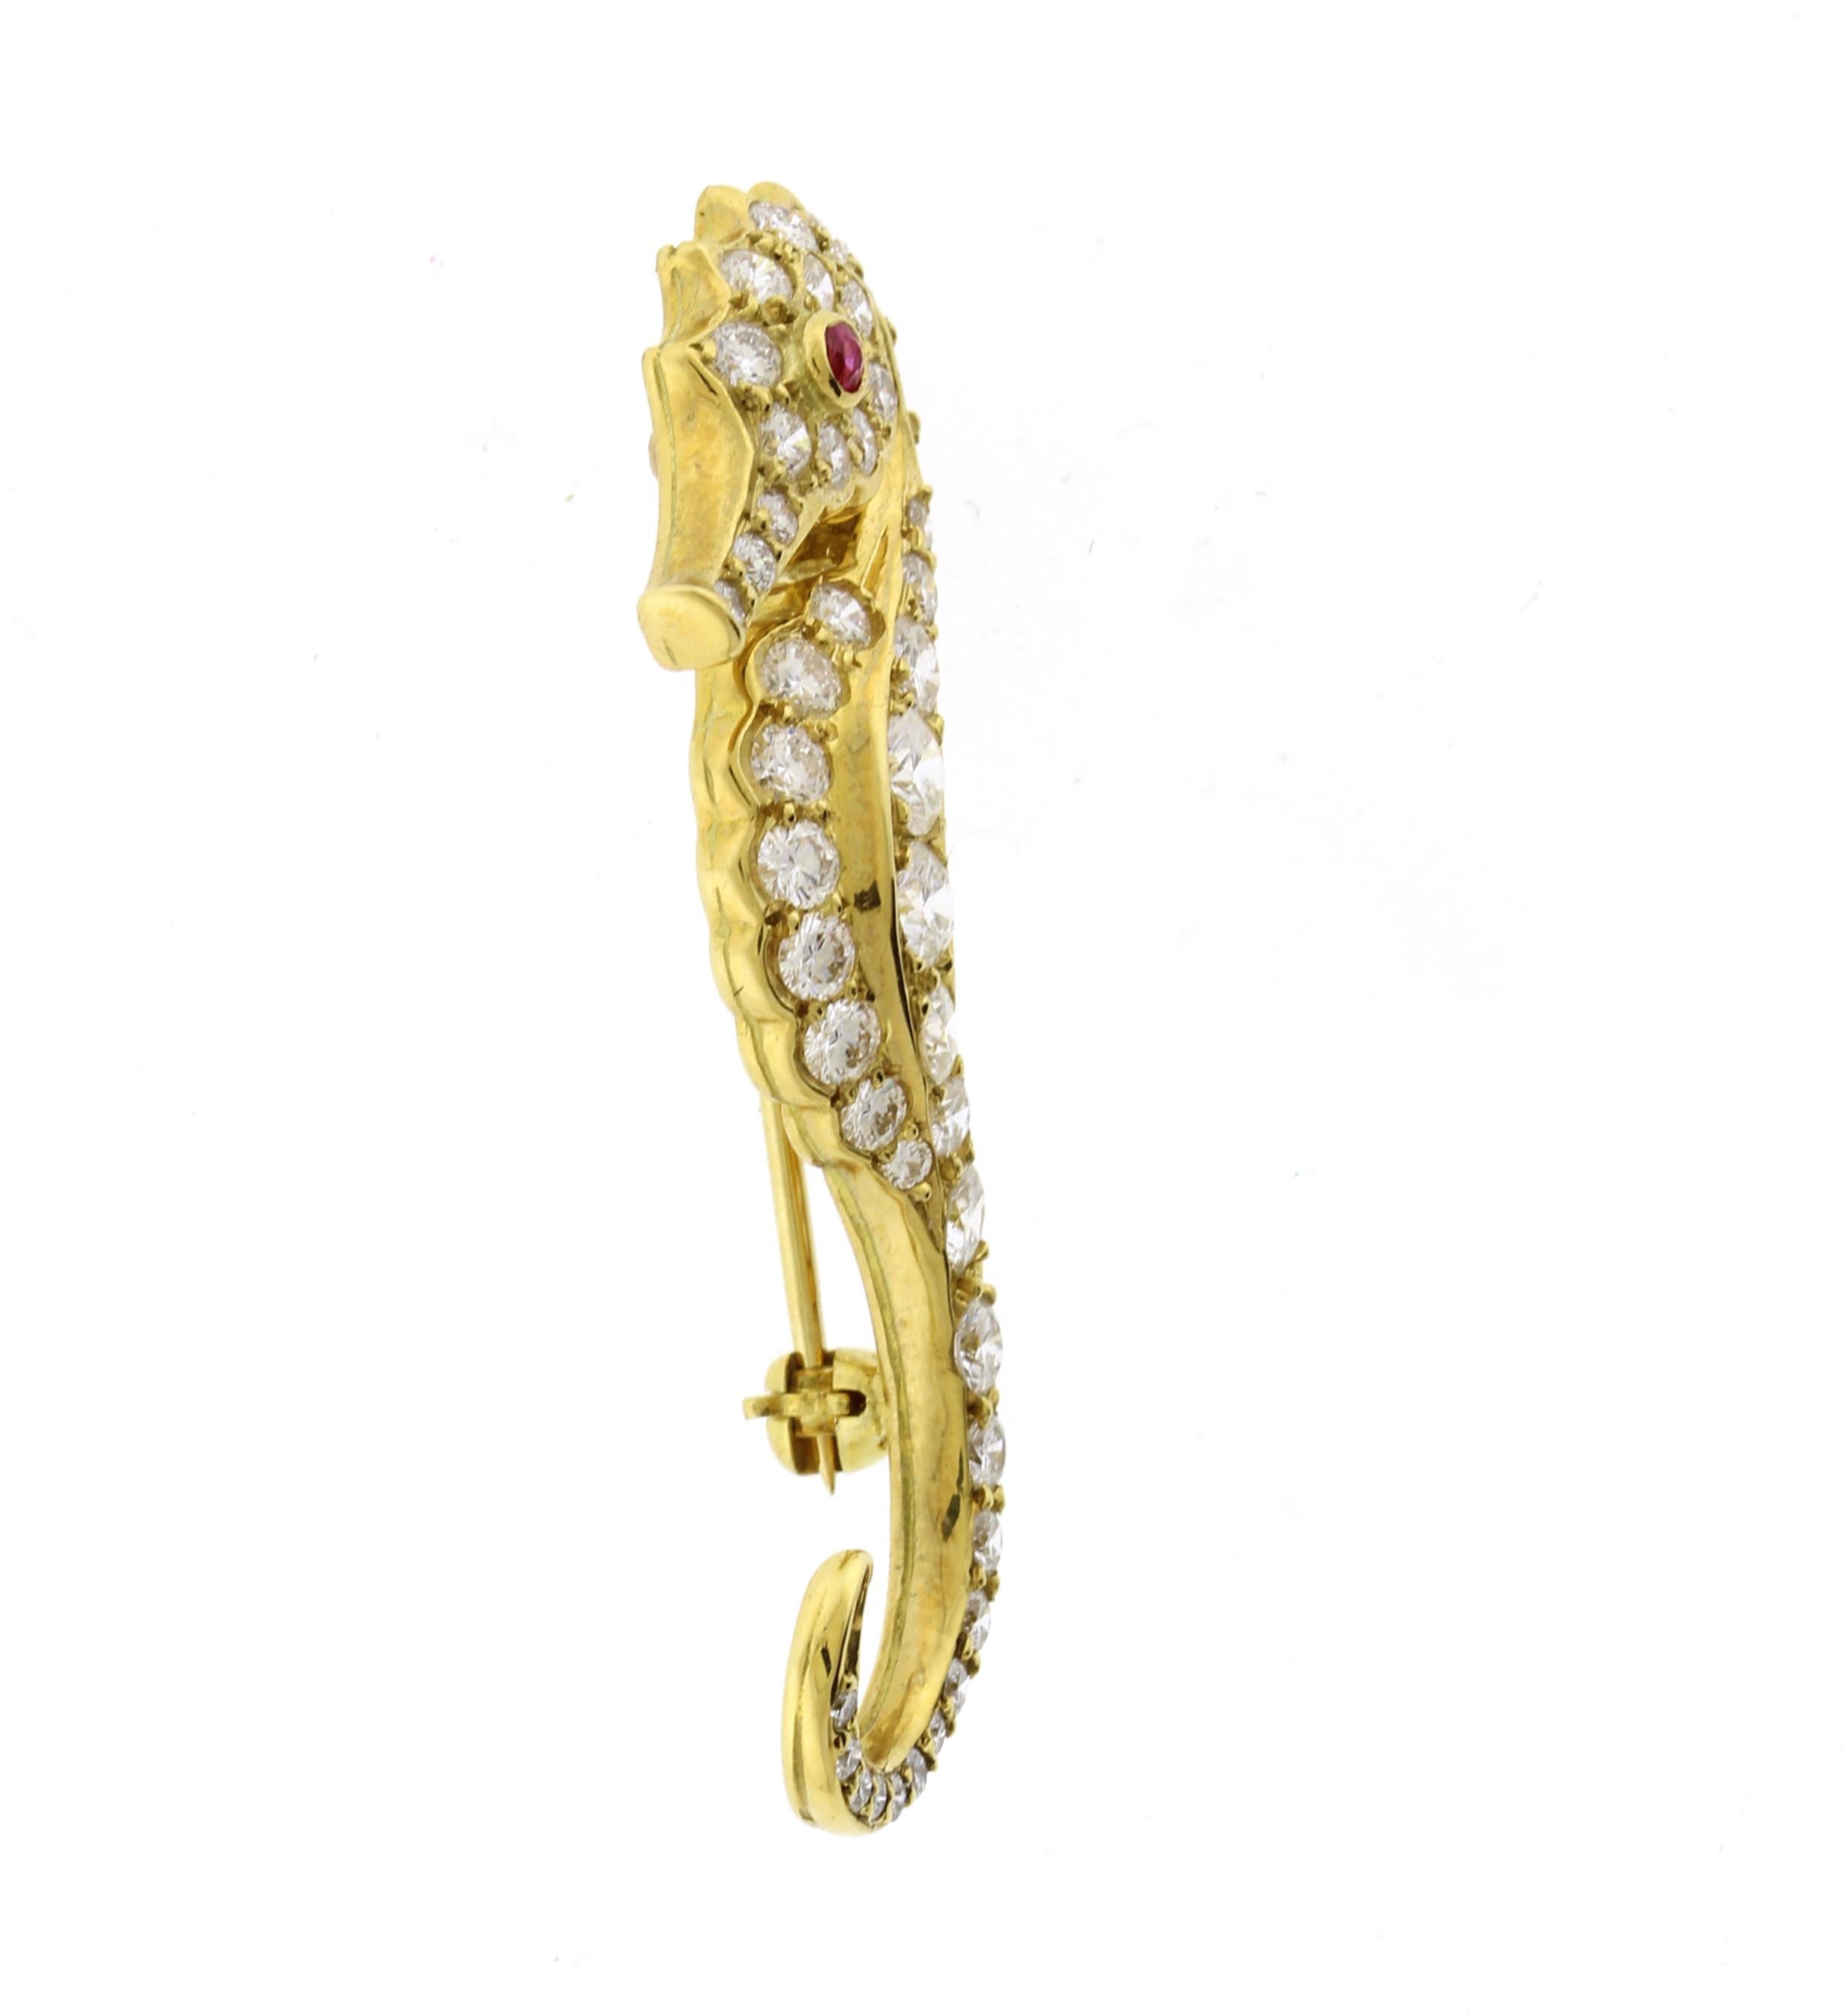 Diamond and Ruby Seahorse Brooch by Pampillonia Jewelers In New Condition For Sale In Bethesda, MD